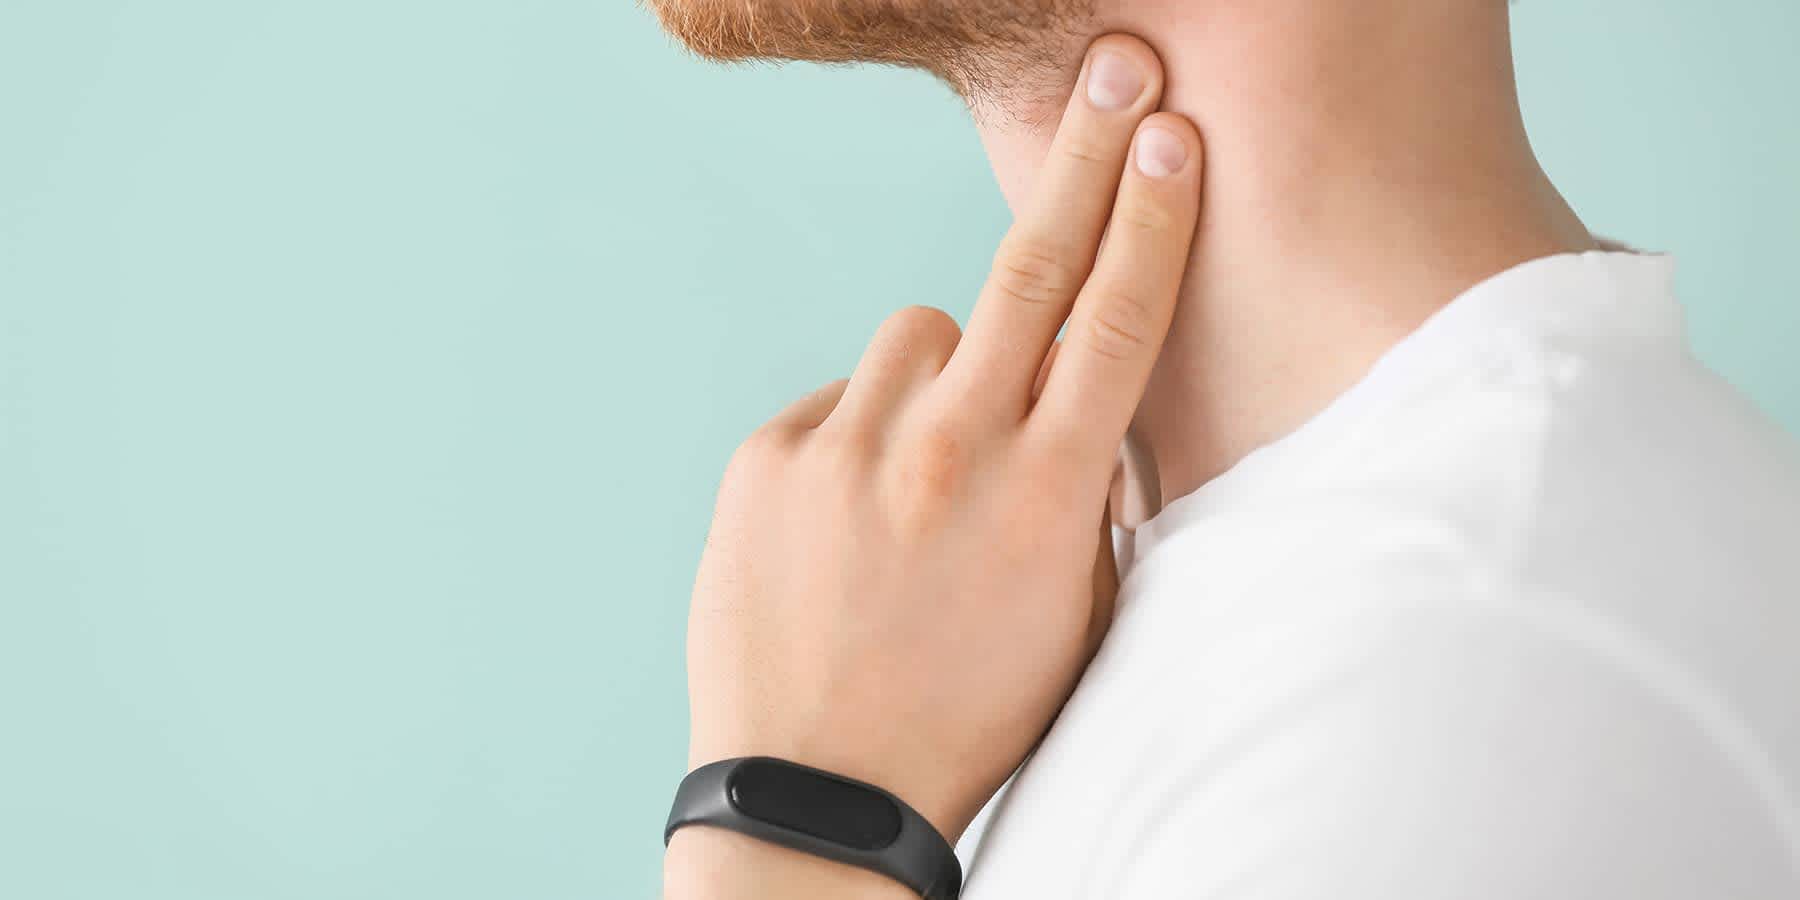 Man putting fingers on neck to check signs of heart disease